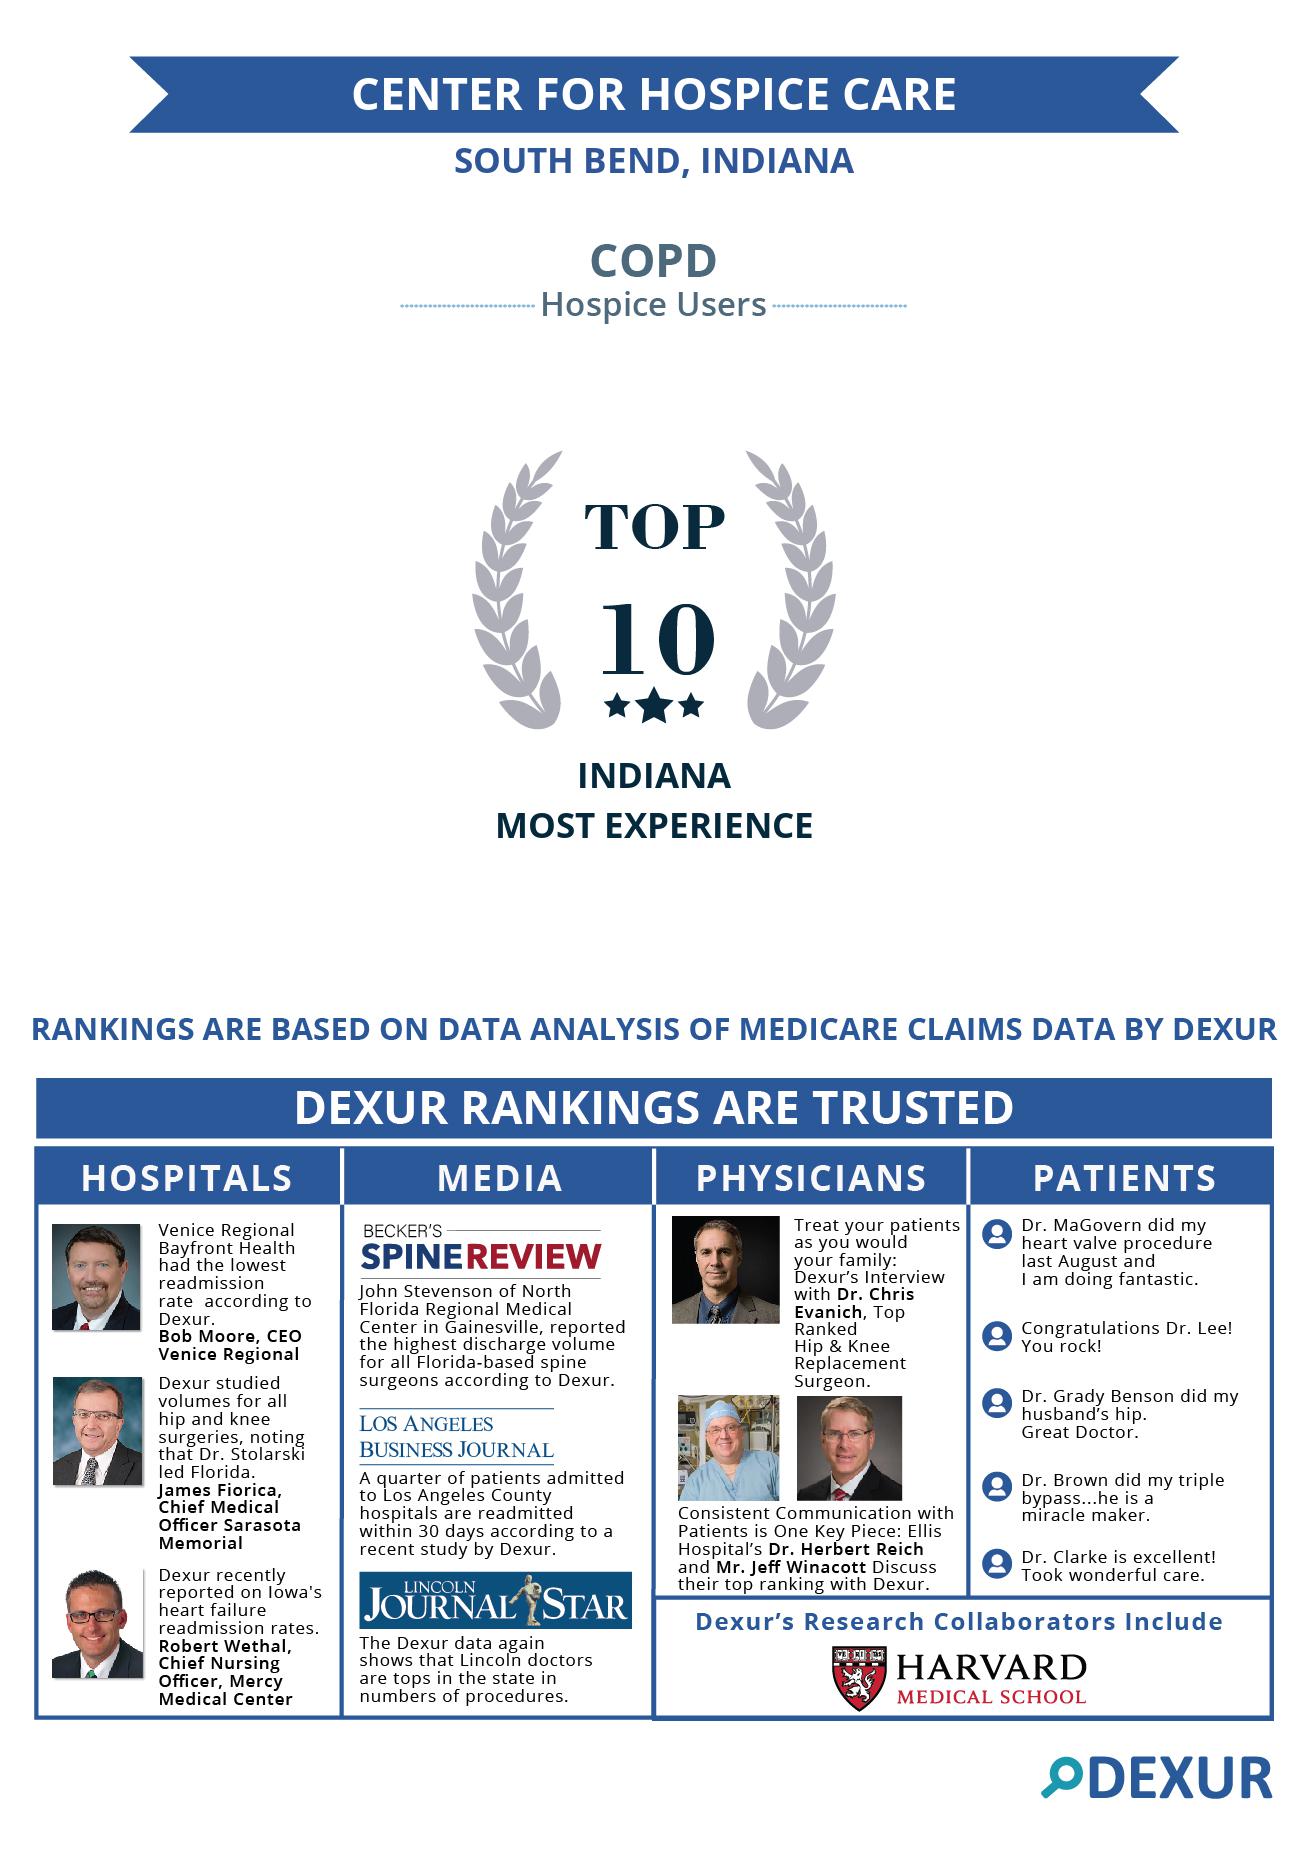 Center for Hospice Care COPD Ranking